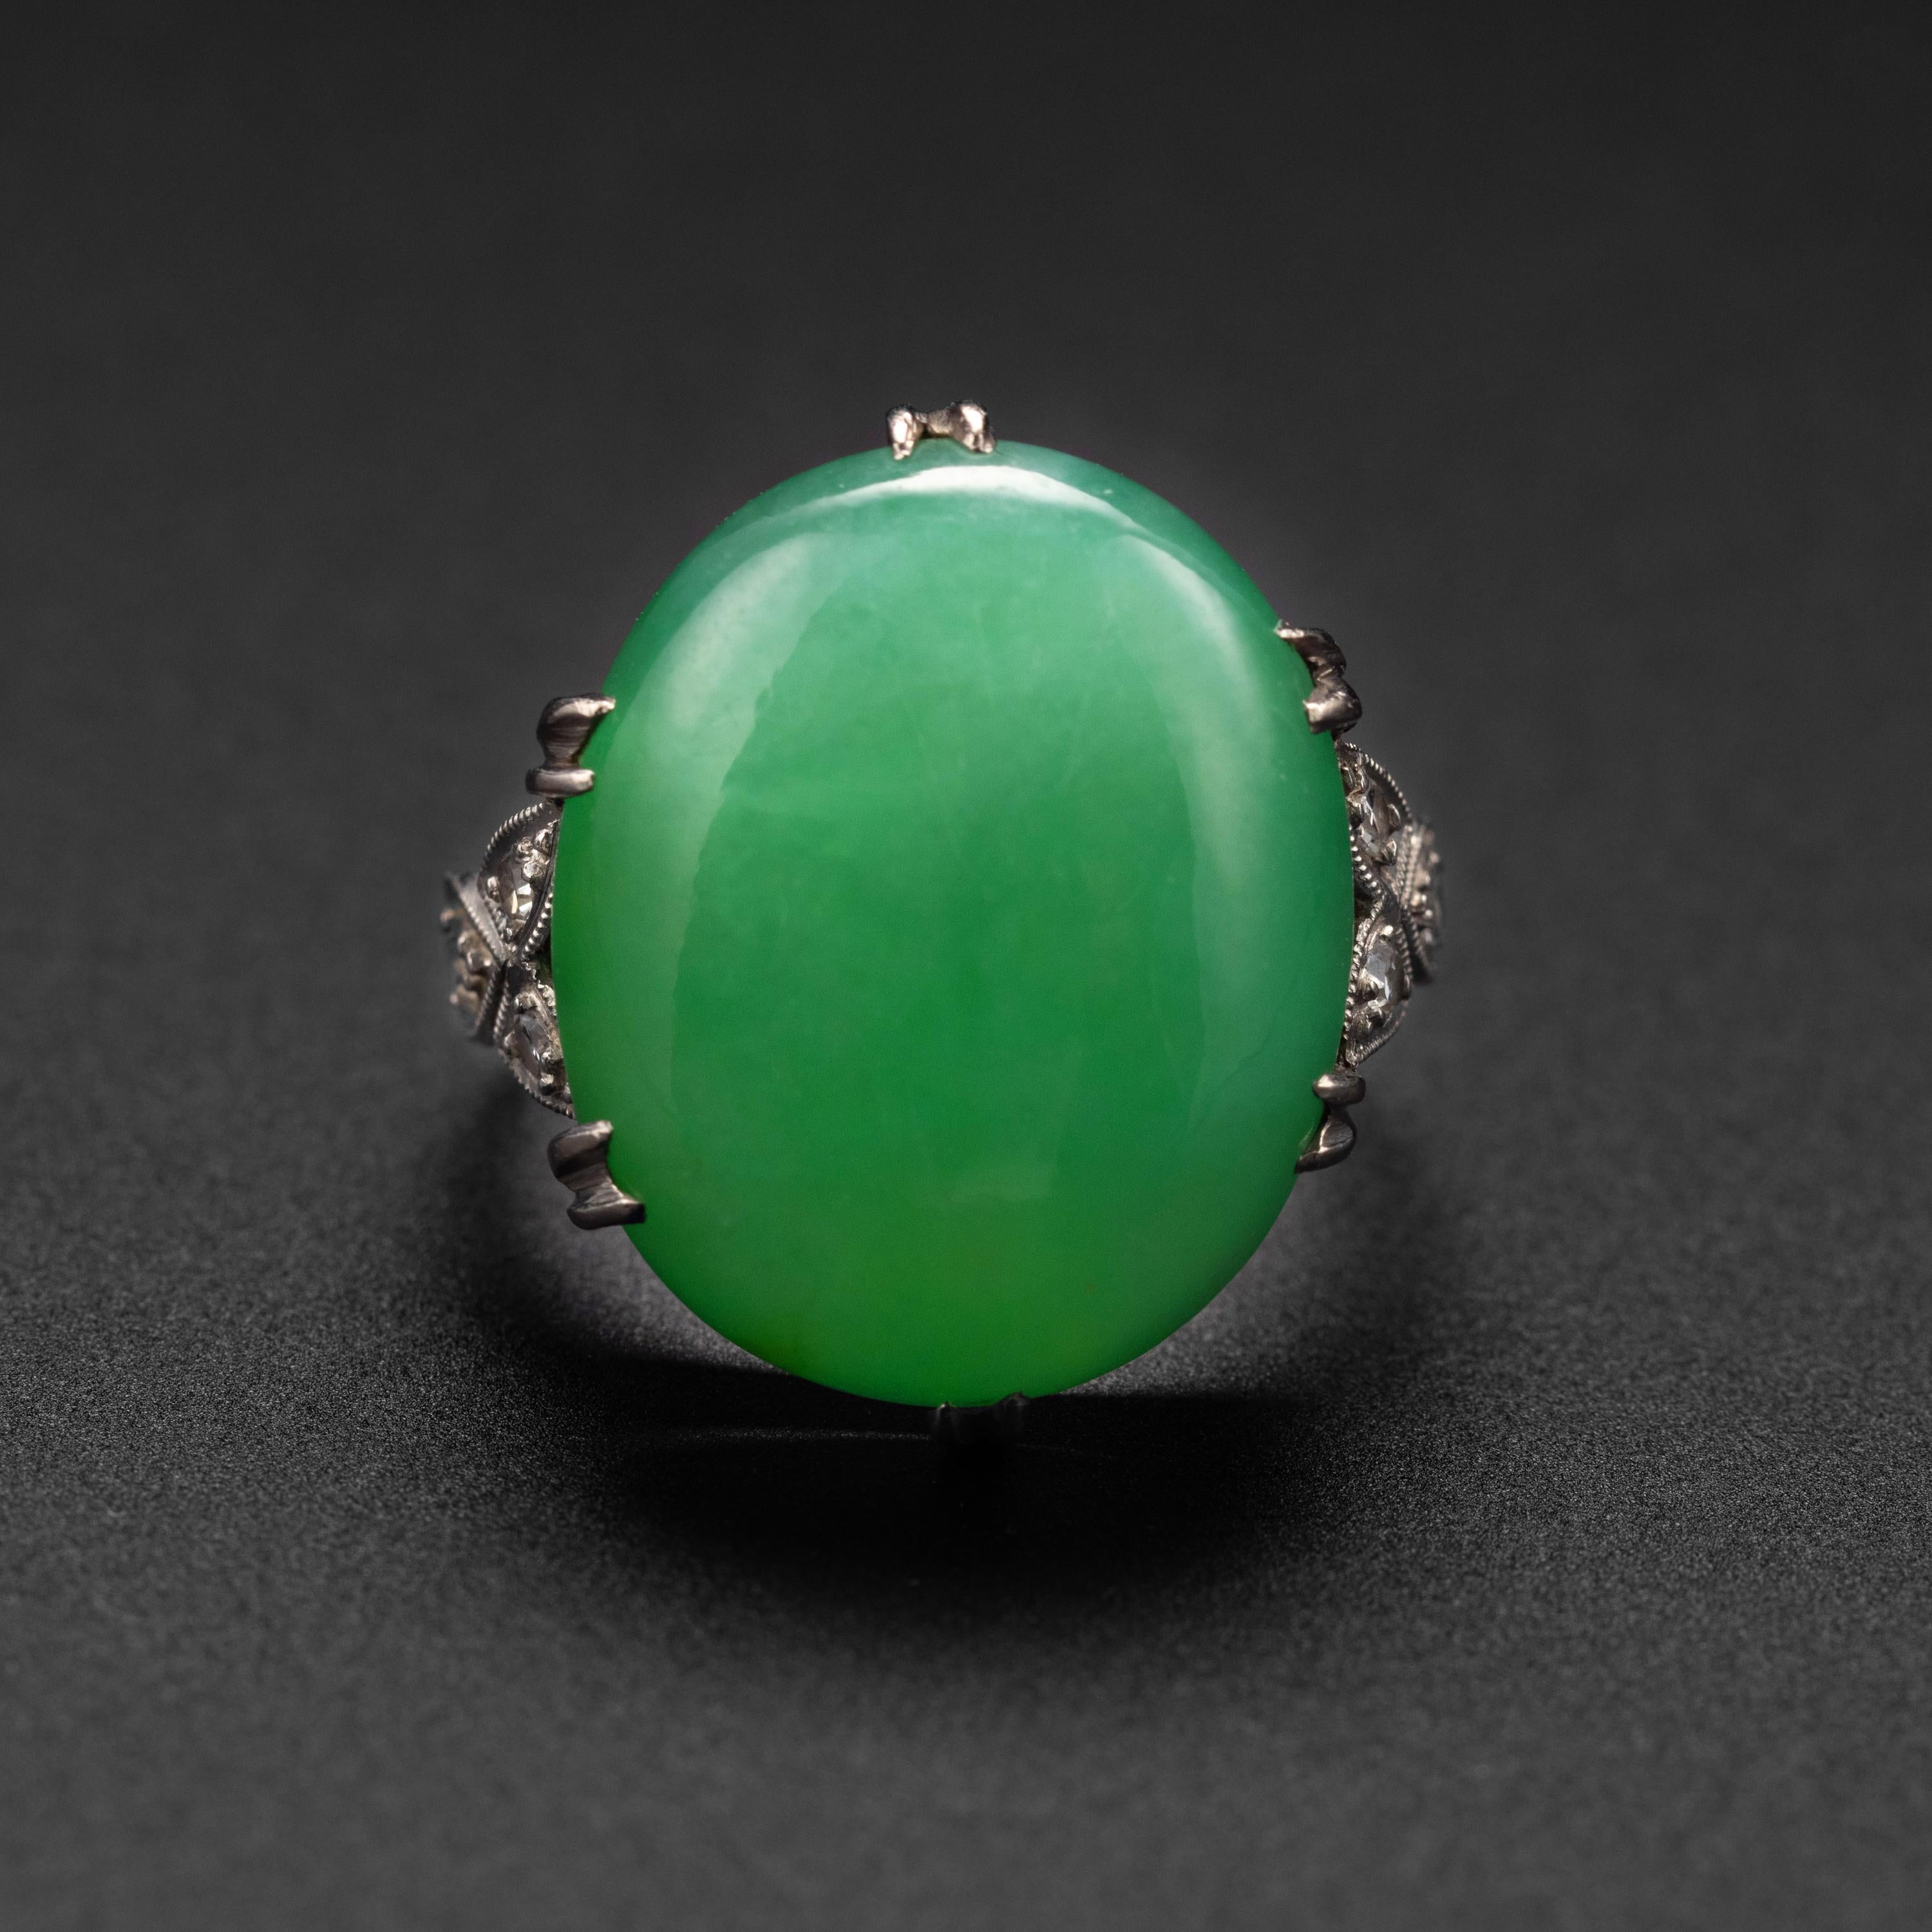 This impeccable Art Deco-era ( circa 1930s) platinum ring features a cabochon of natural and untreated light apple green jadeite jade that is plump and bursting with light. The jade is actually a double cabochon; an old-school lapidary technique